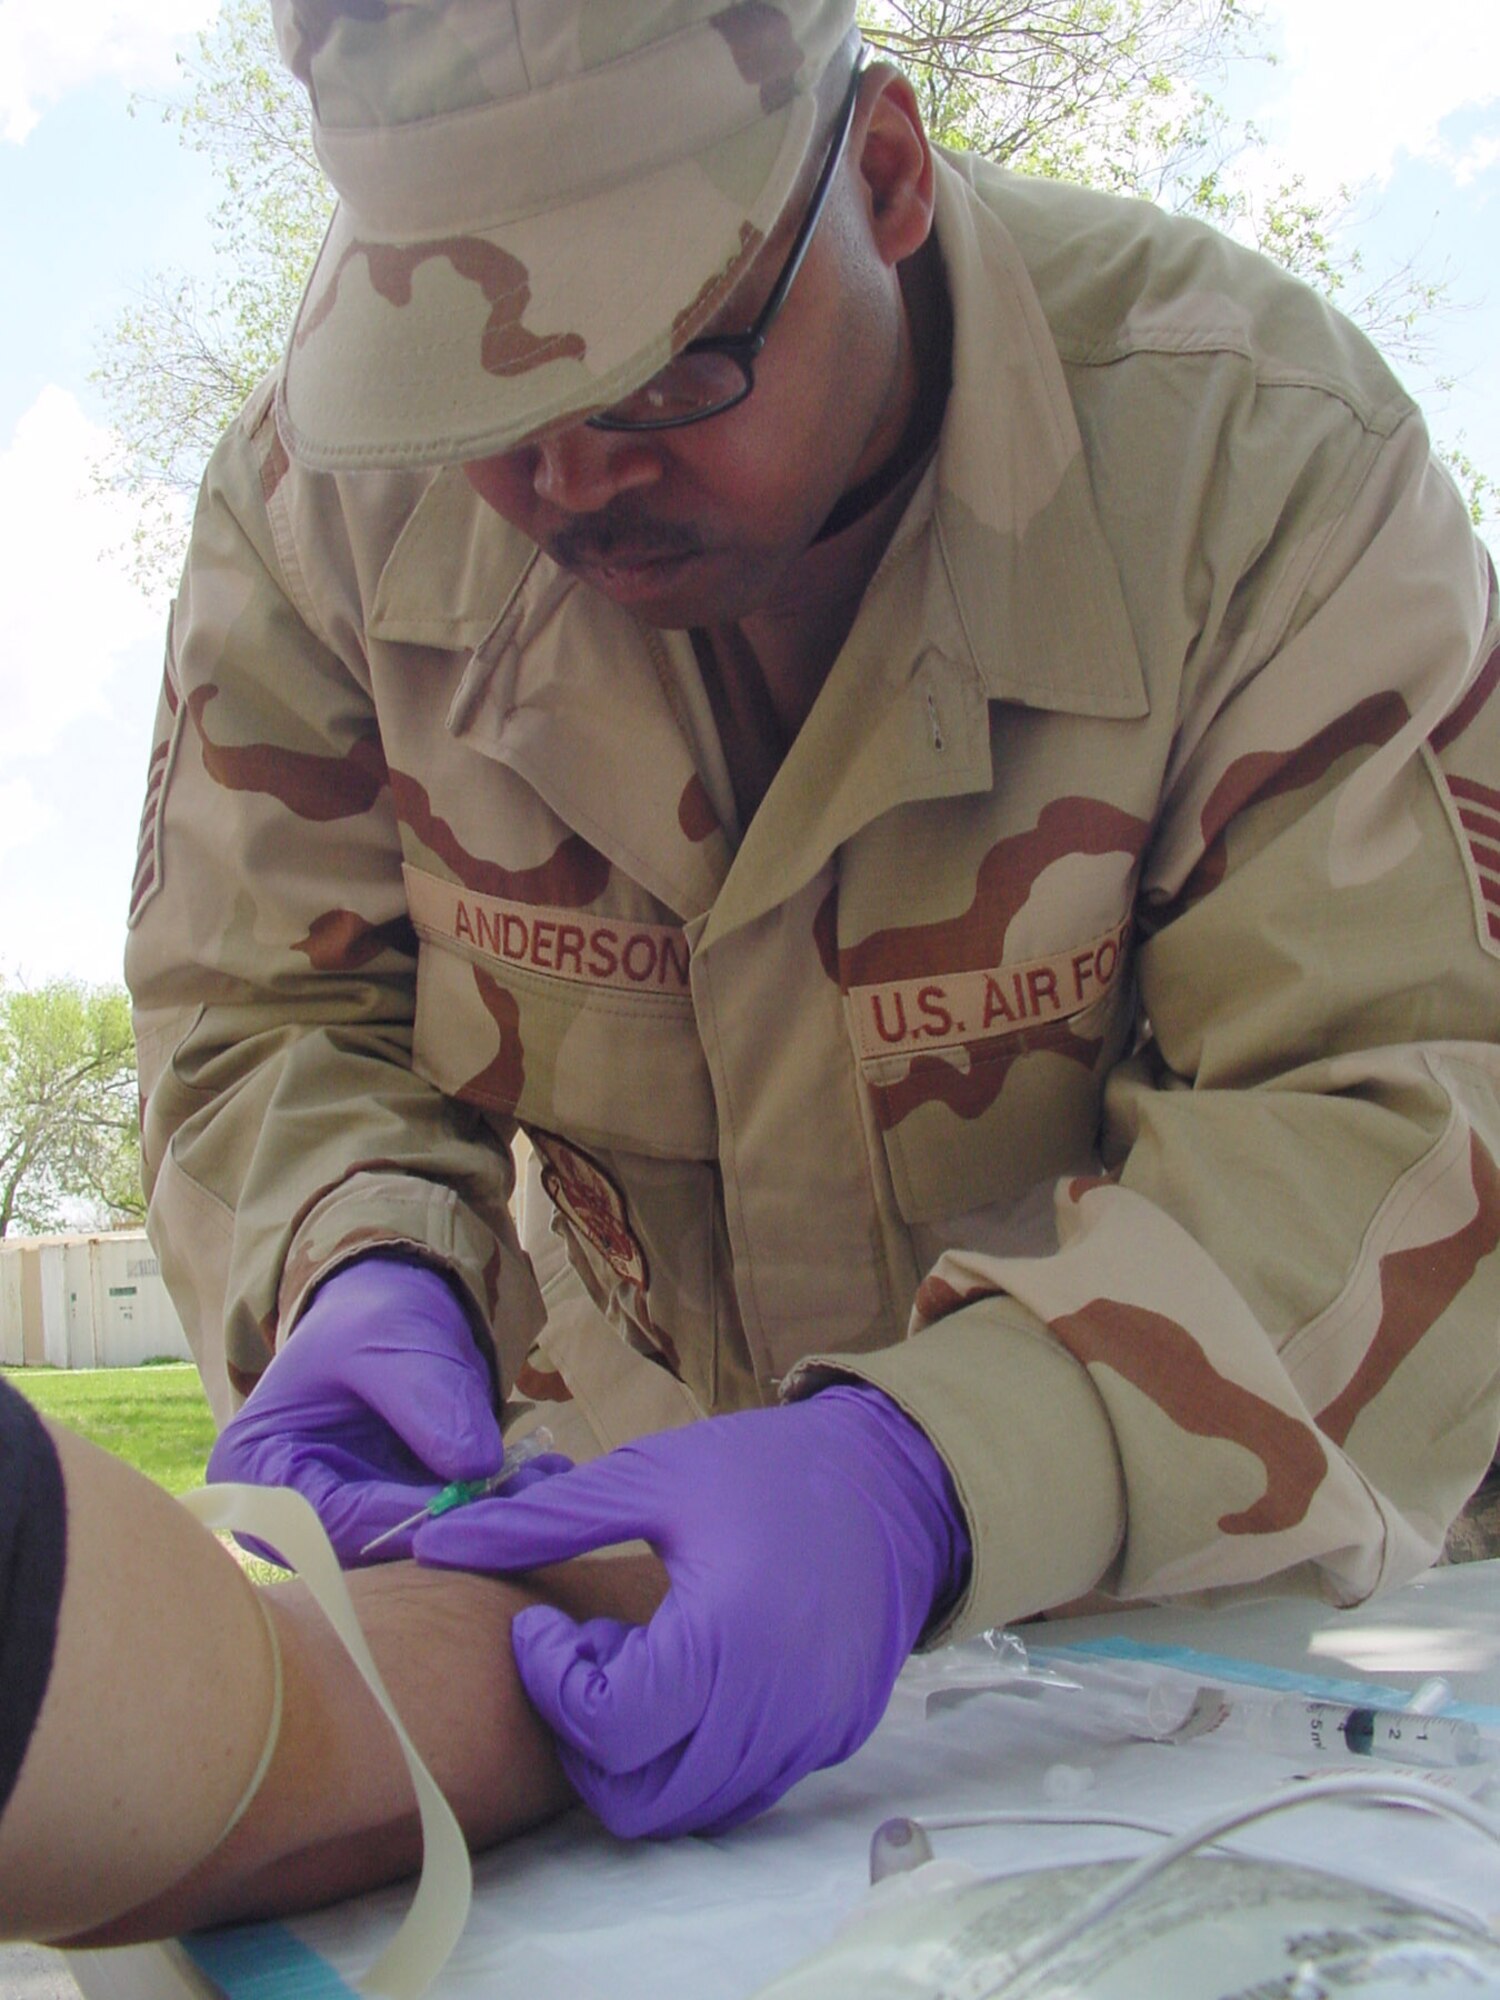 Sergeant Anderson searches for a patient’s vein before inserting a catheter tube into the person’s arm, so he can draw blood during transition team training at Fort Riley, Kan. Sergeant Anderson is attending the 60-day, pre-deployment training from McConnell Air Force Base. (Photo by Army Master Sgt. Jack Lee). 